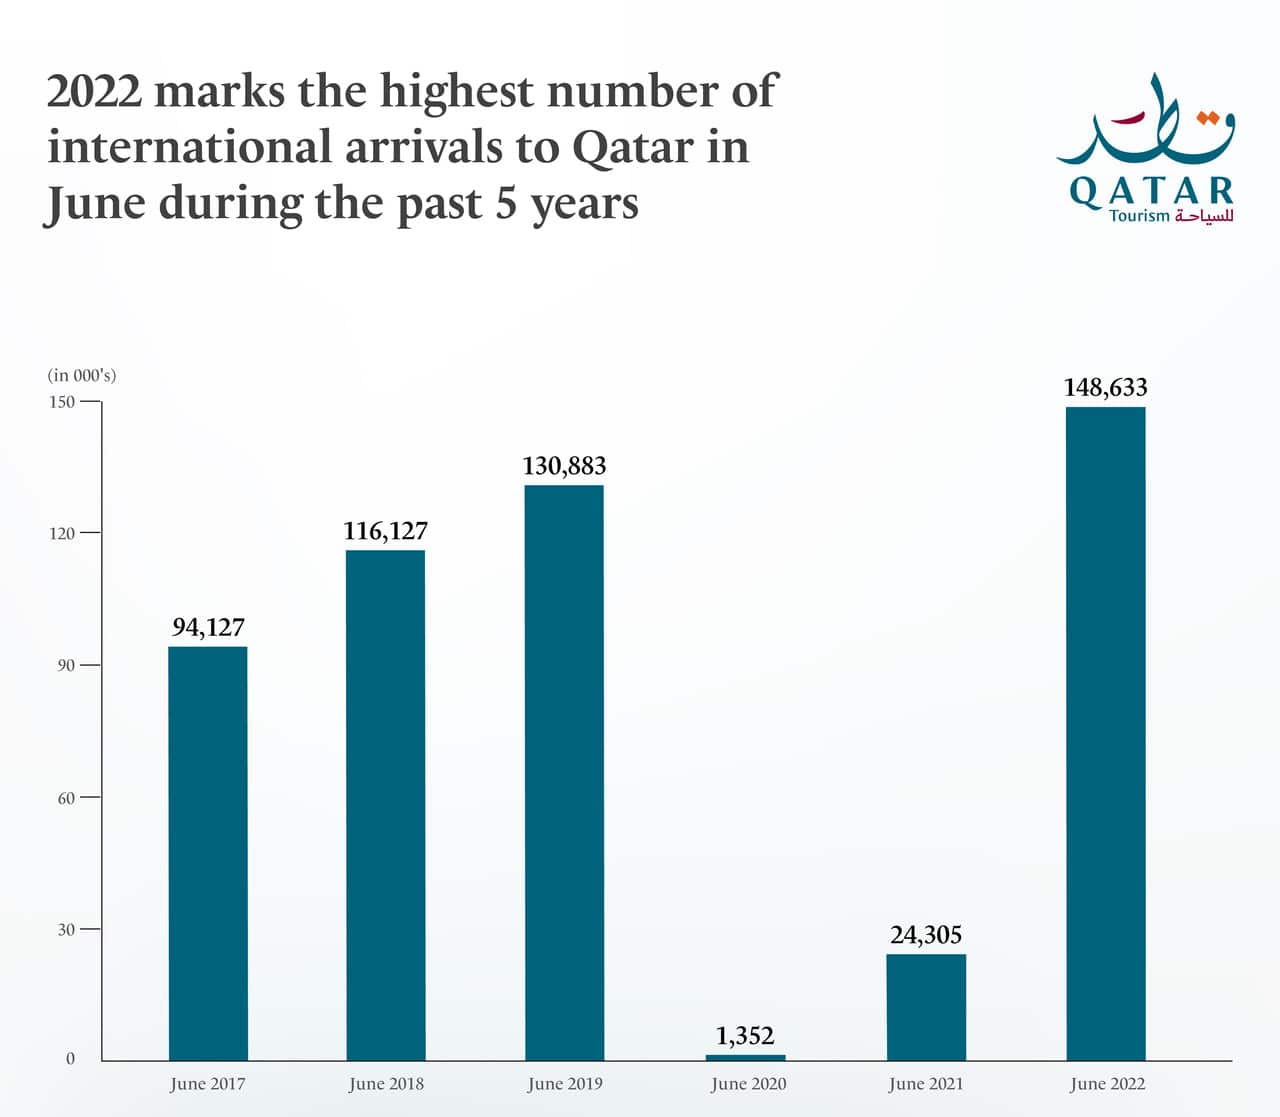 Qatar’s international arrivals up by 19% in the first half of 2022 compared to full year 2021